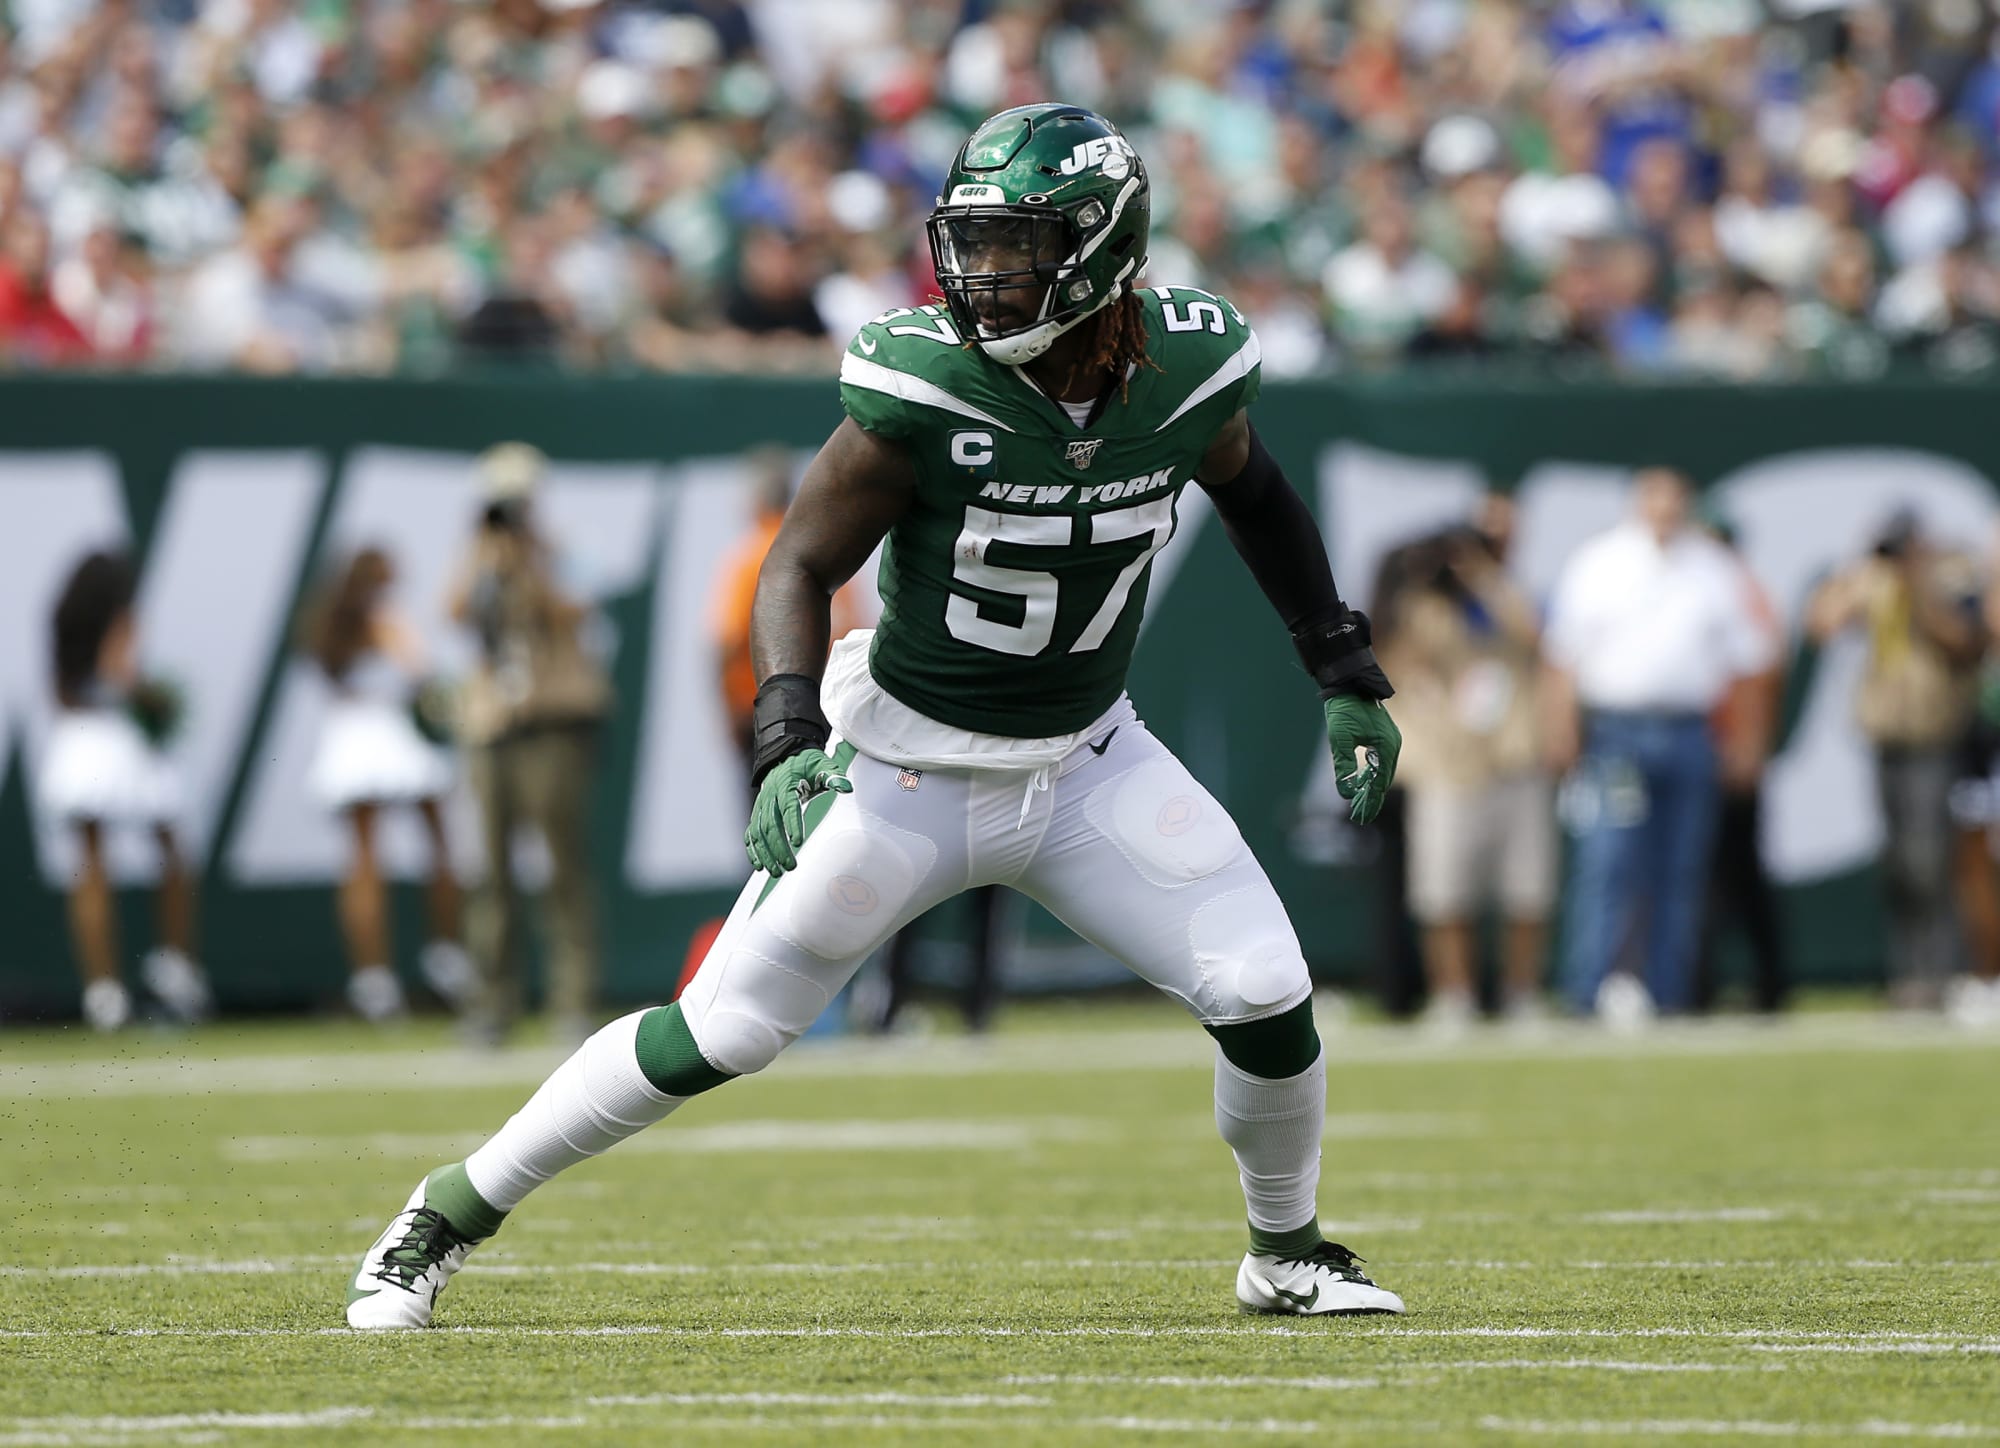 New York Jets: C.J. Mosley Opts Out of 2020 NFL Season